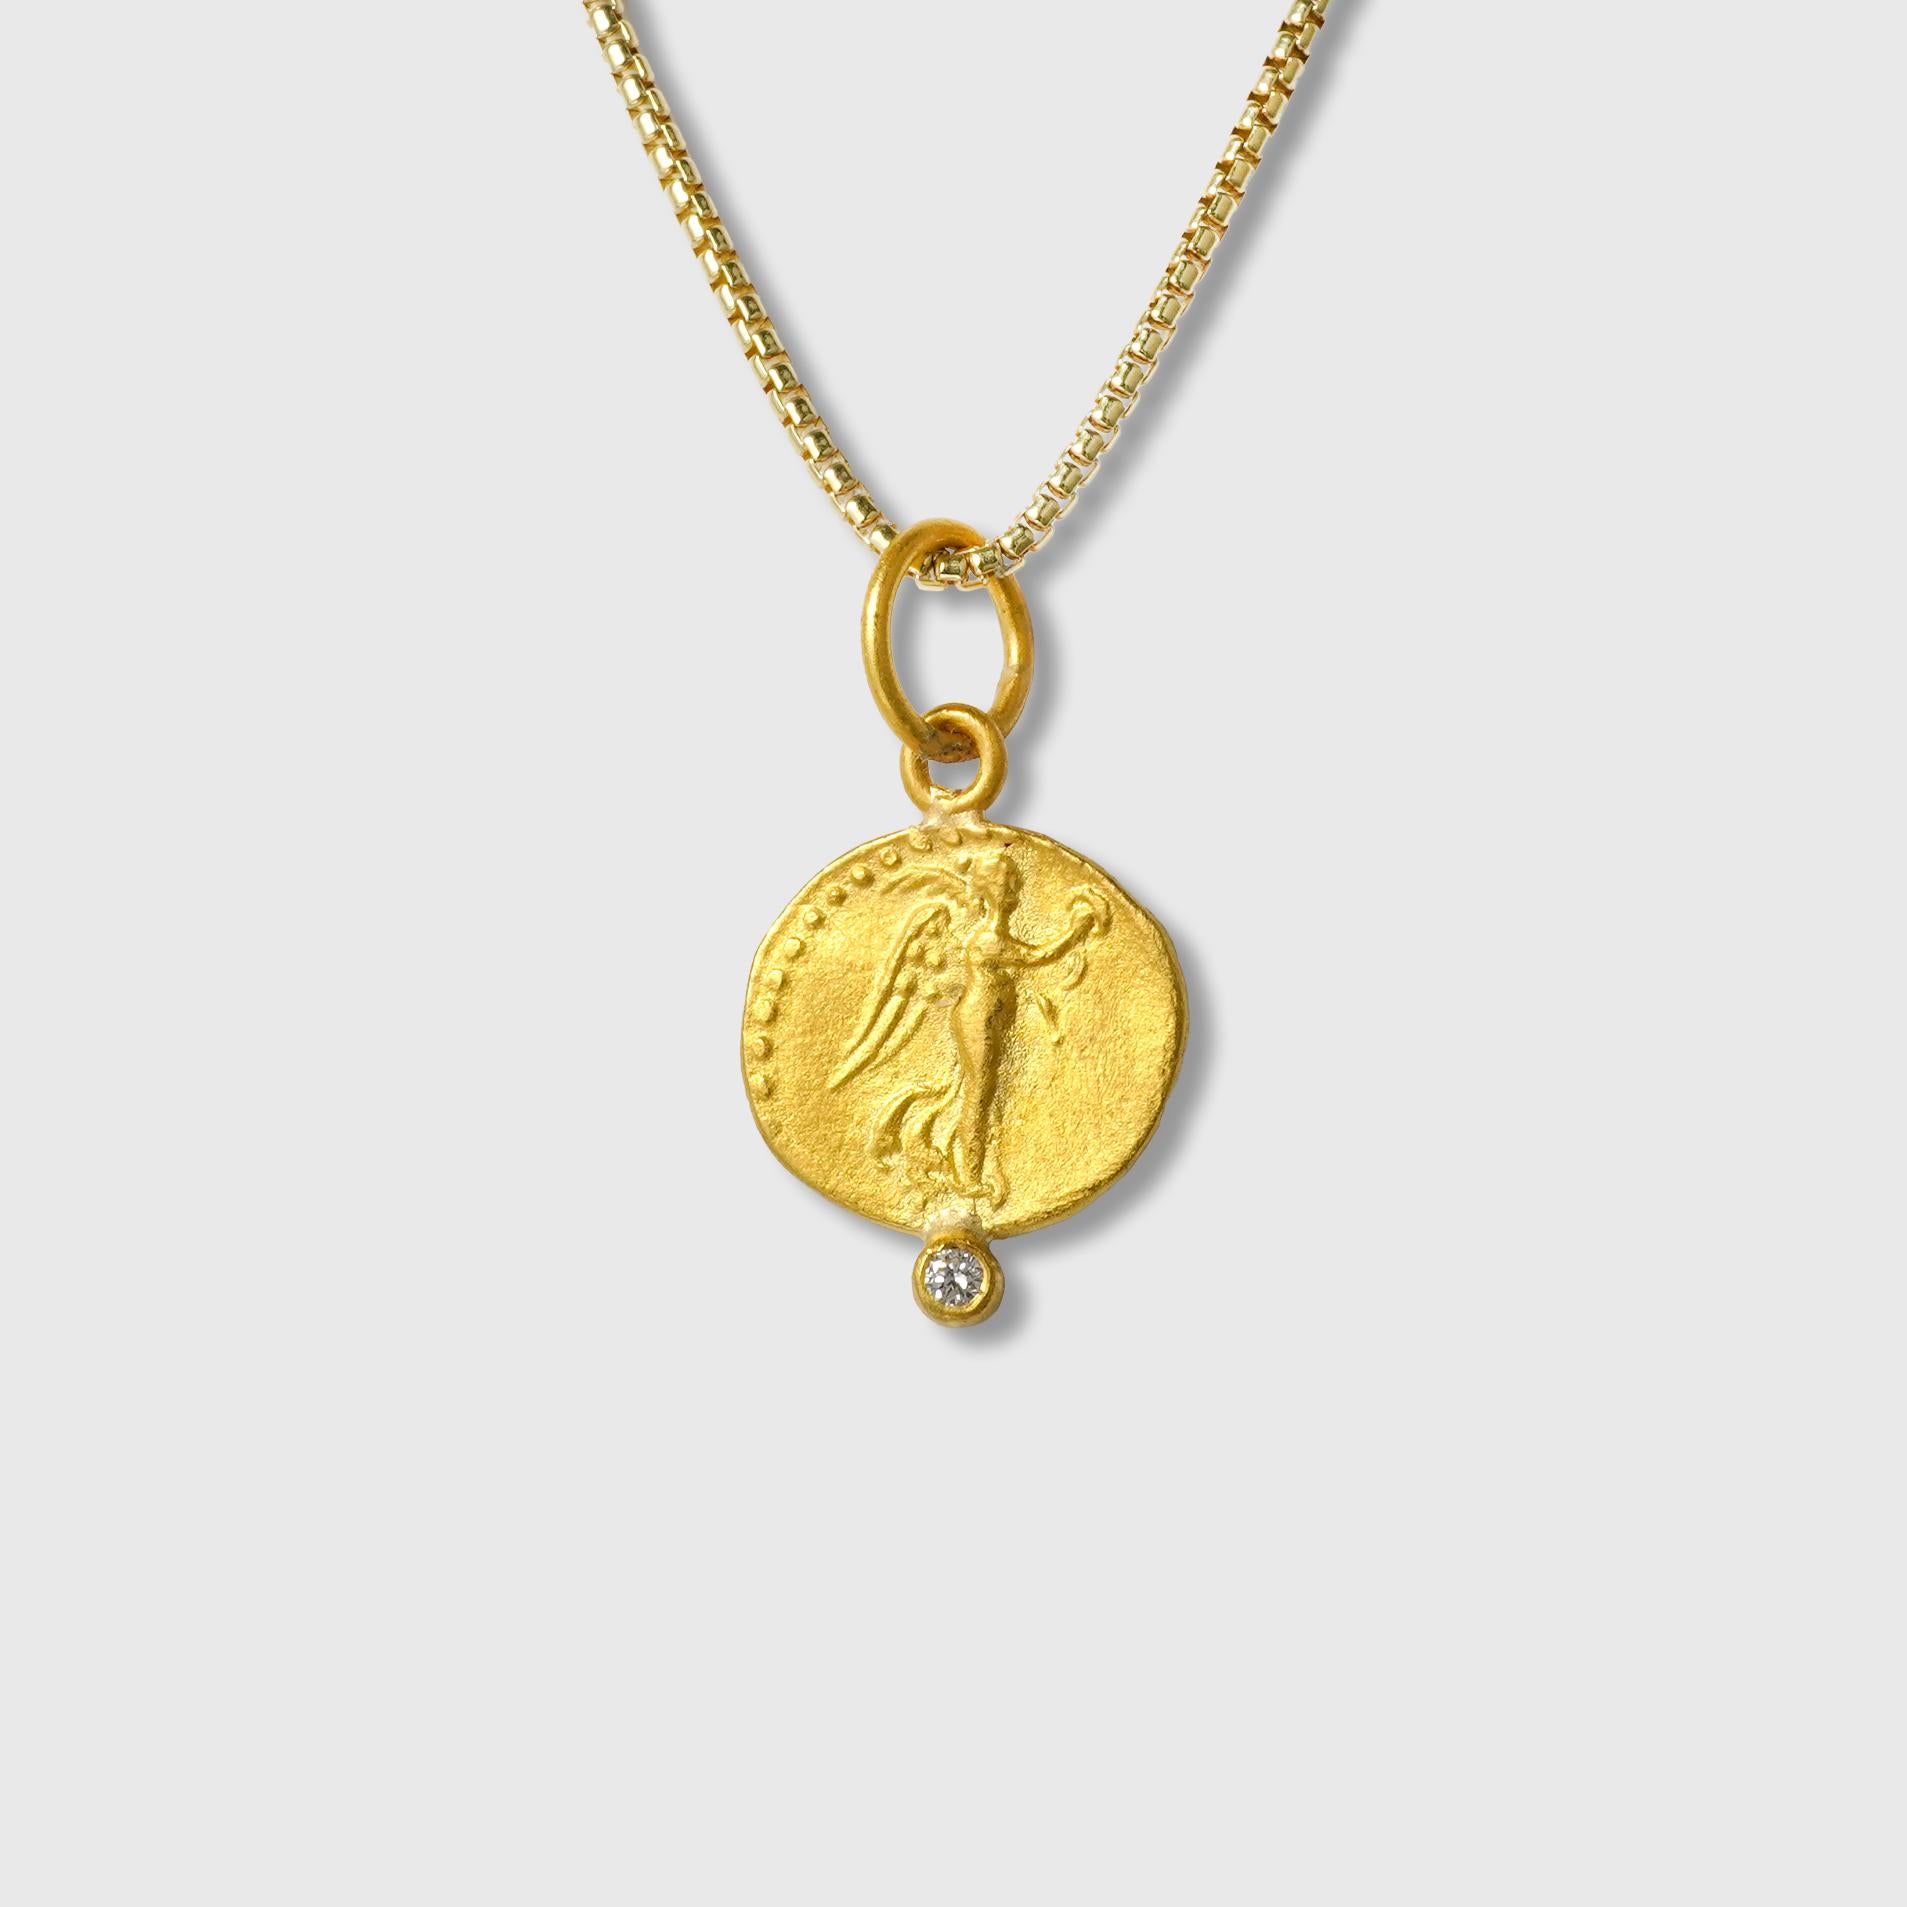 Round Cut Ancient, Nike Charm Coin (Replica) Pendant with 0.02ct Diamond, 24kt Solid Gold For Sale